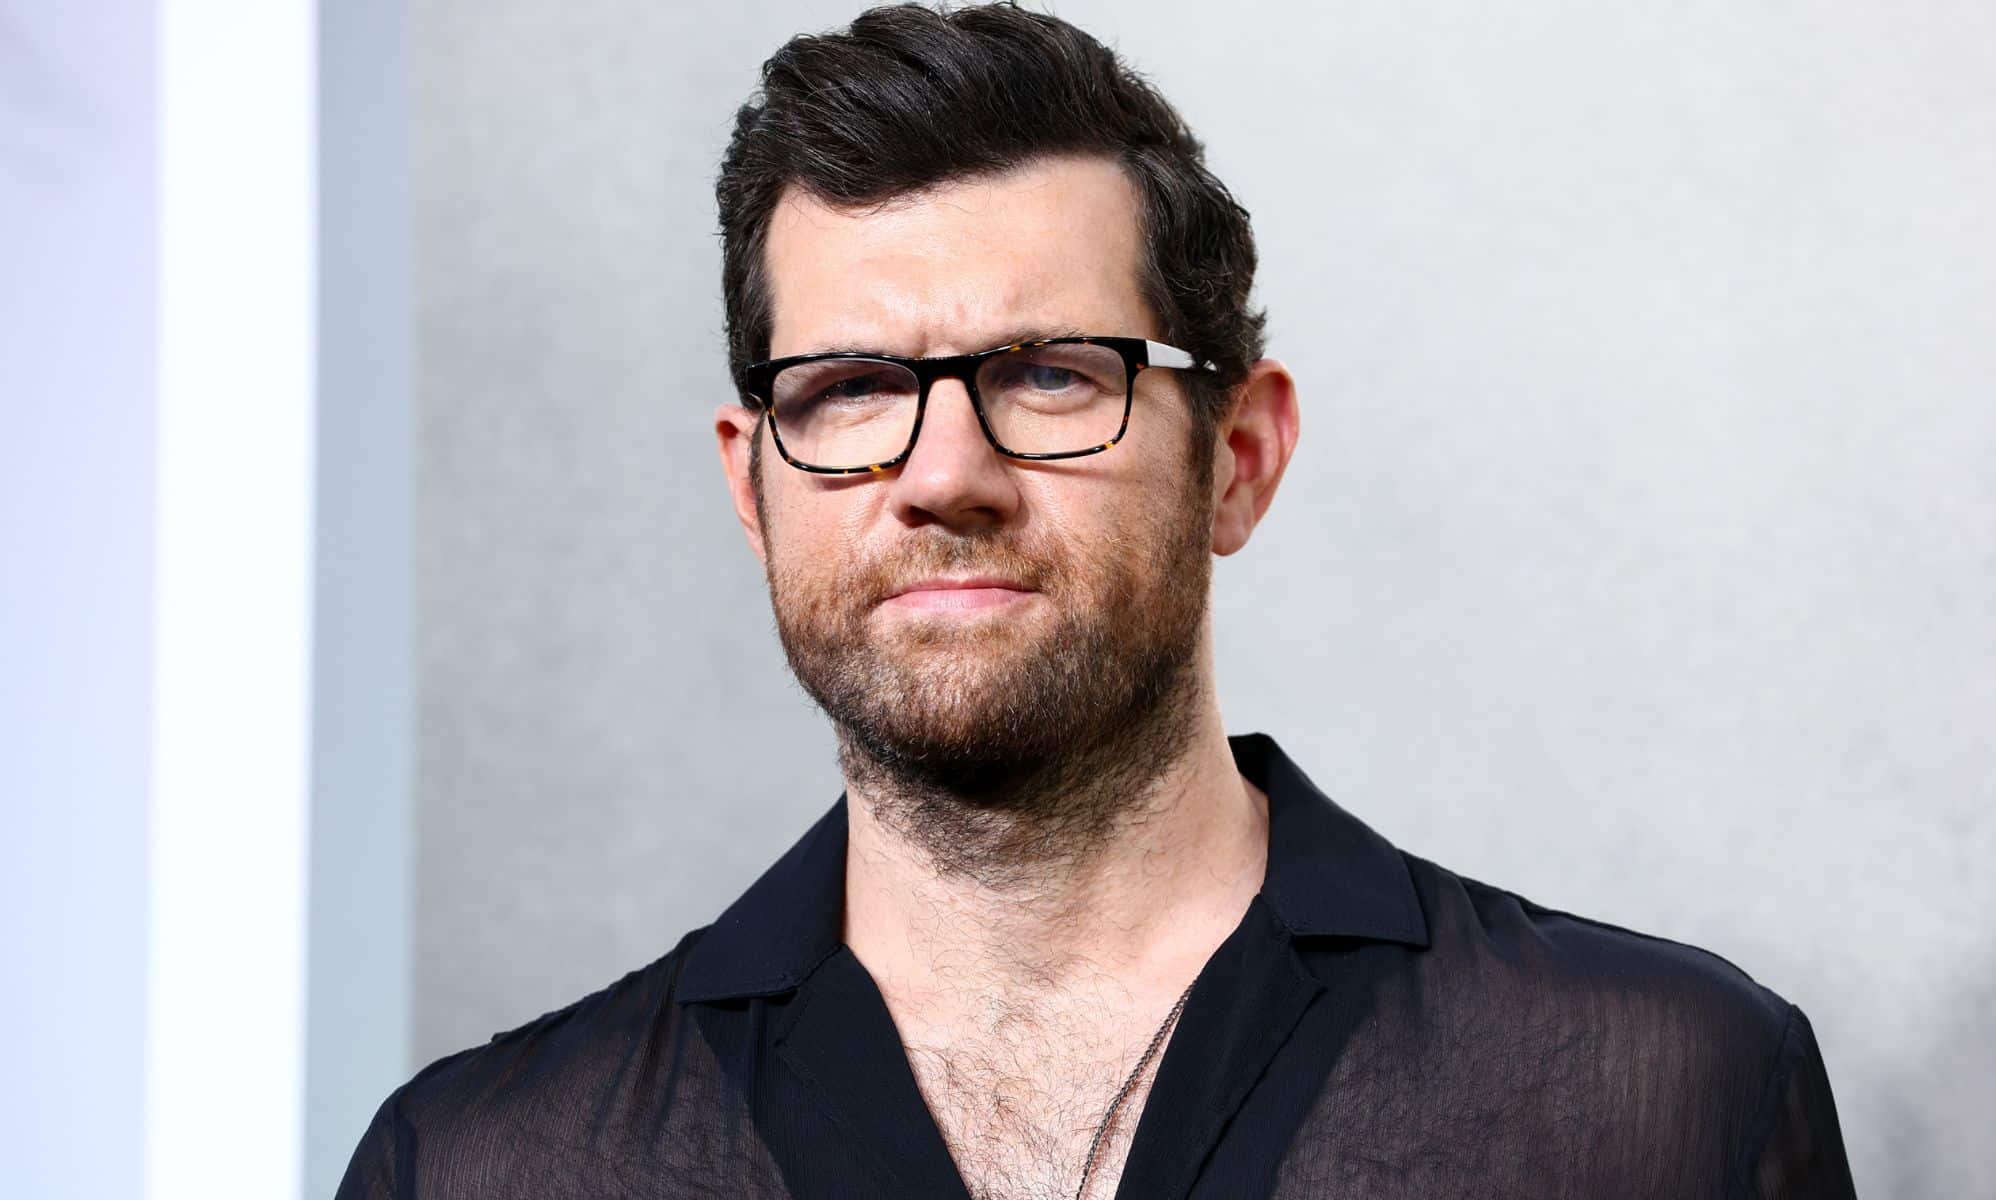 Billy Eichner wears a dark mesh top as he stares at the camera